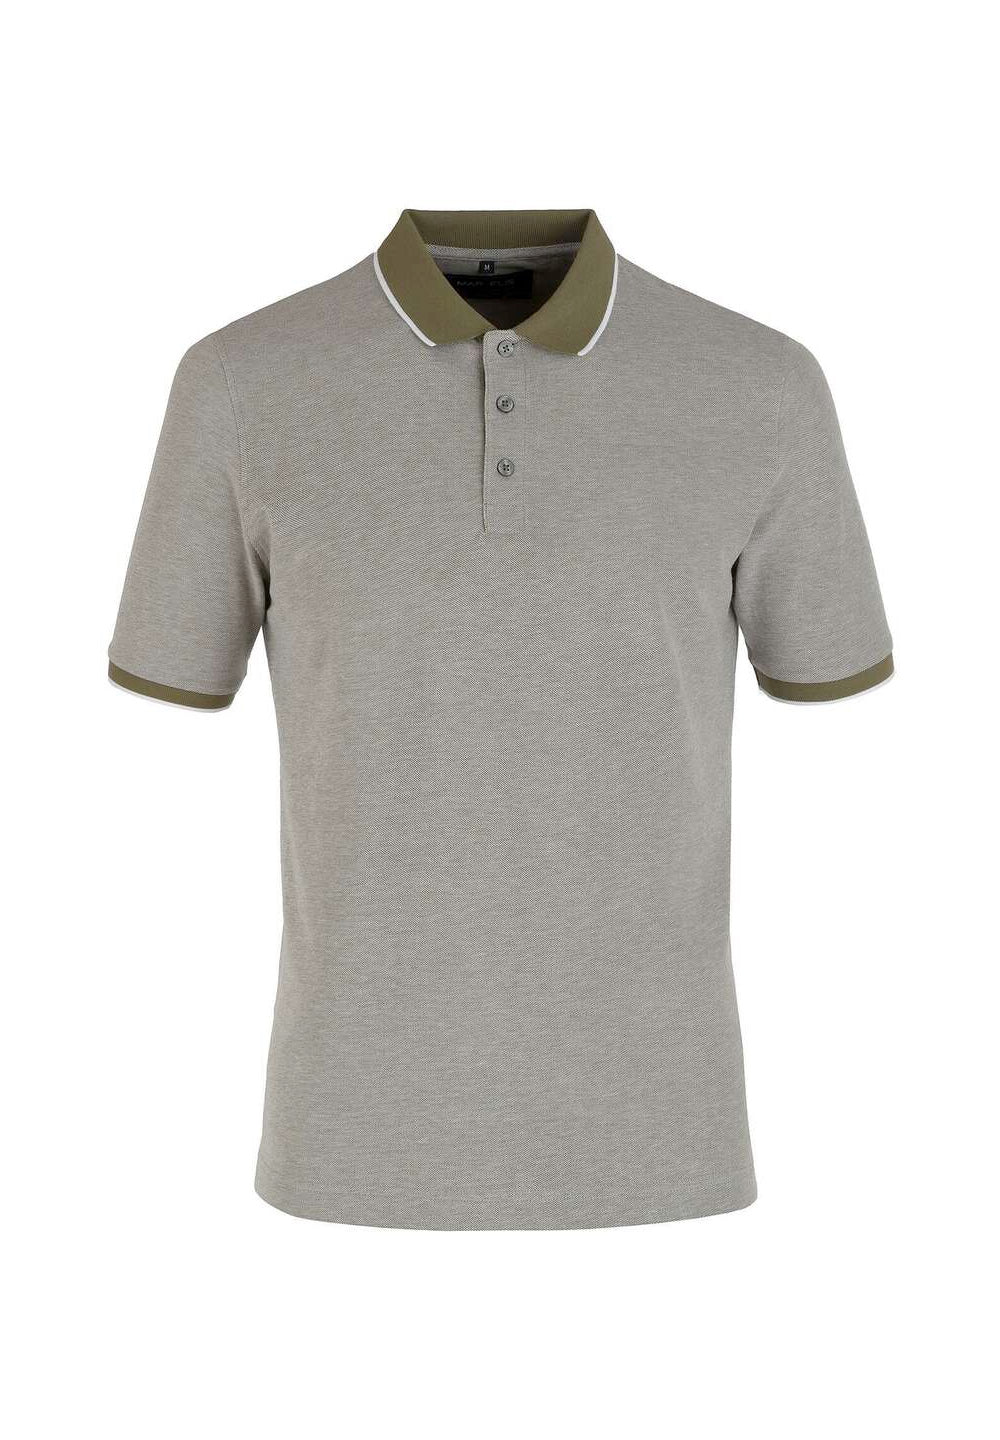 Poloshirt - Casual Fit - Polokragen - Einfarbig - Olive